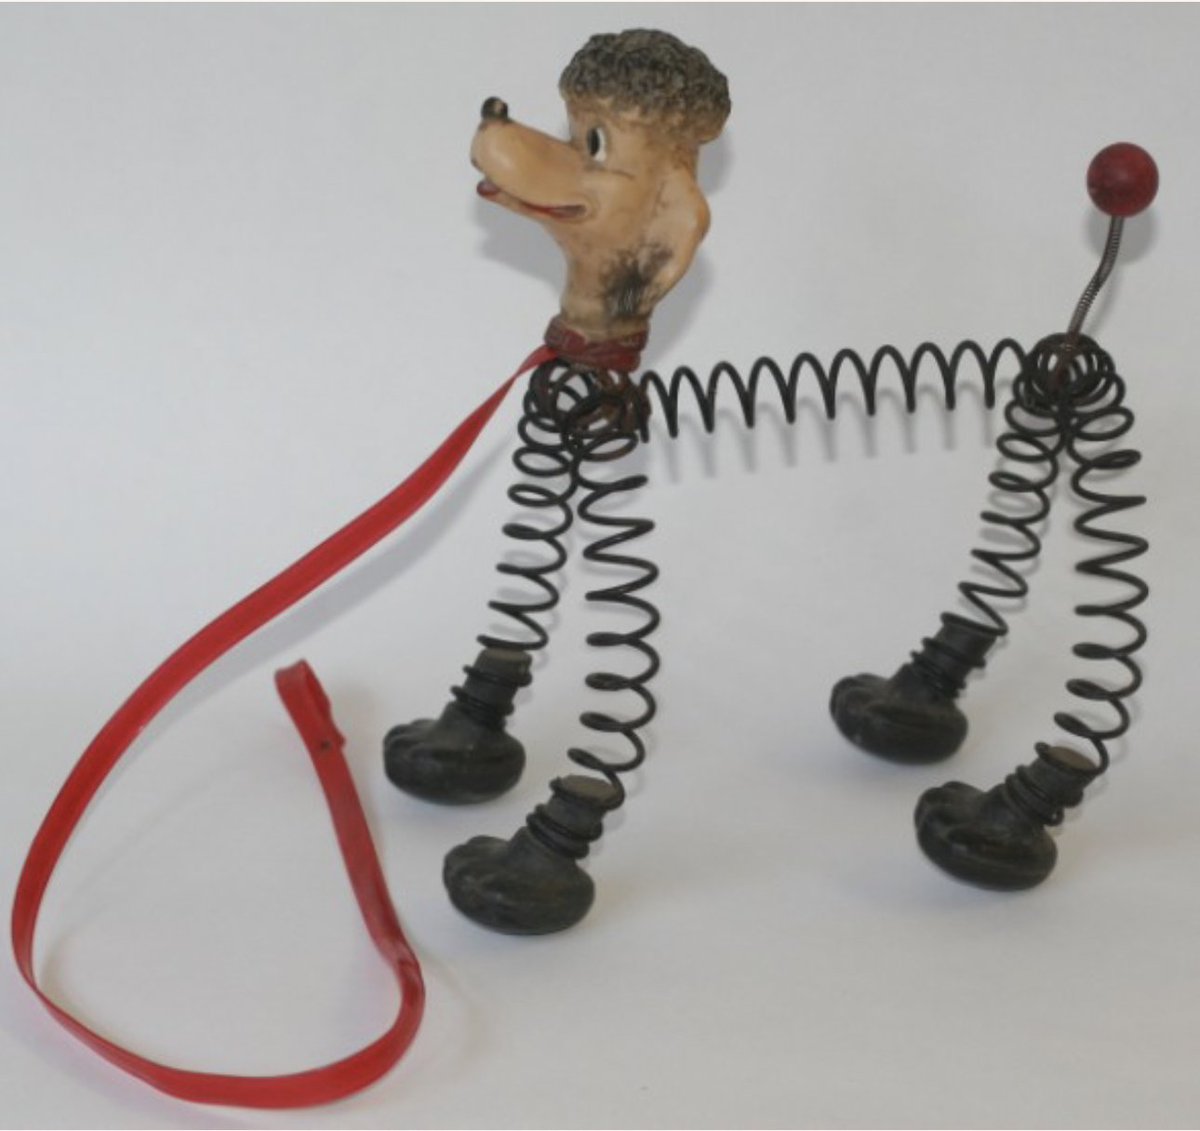 We are all ready to leap into #ArchivesPets for this month's #ArchivesHashtagParty. For those who couldn't have a real pet, there was this 'Leaping Animal Toy' was patented by #Hartford resident William Brodrib in 1956.  #toys #animaltoys #slinkydog